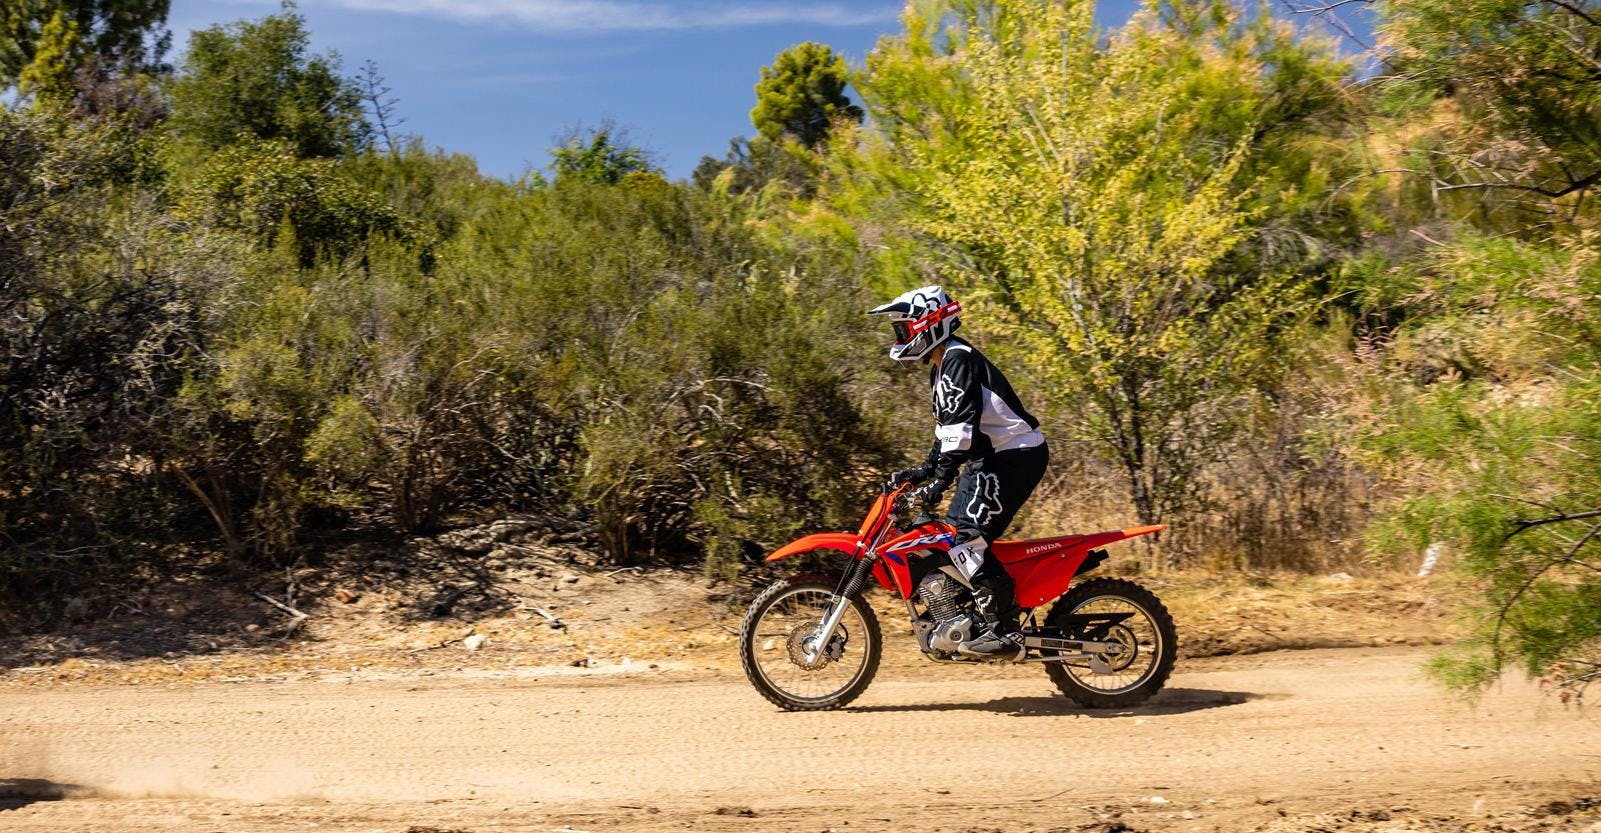 Honda CRF125FB in extreme red colour on off road track